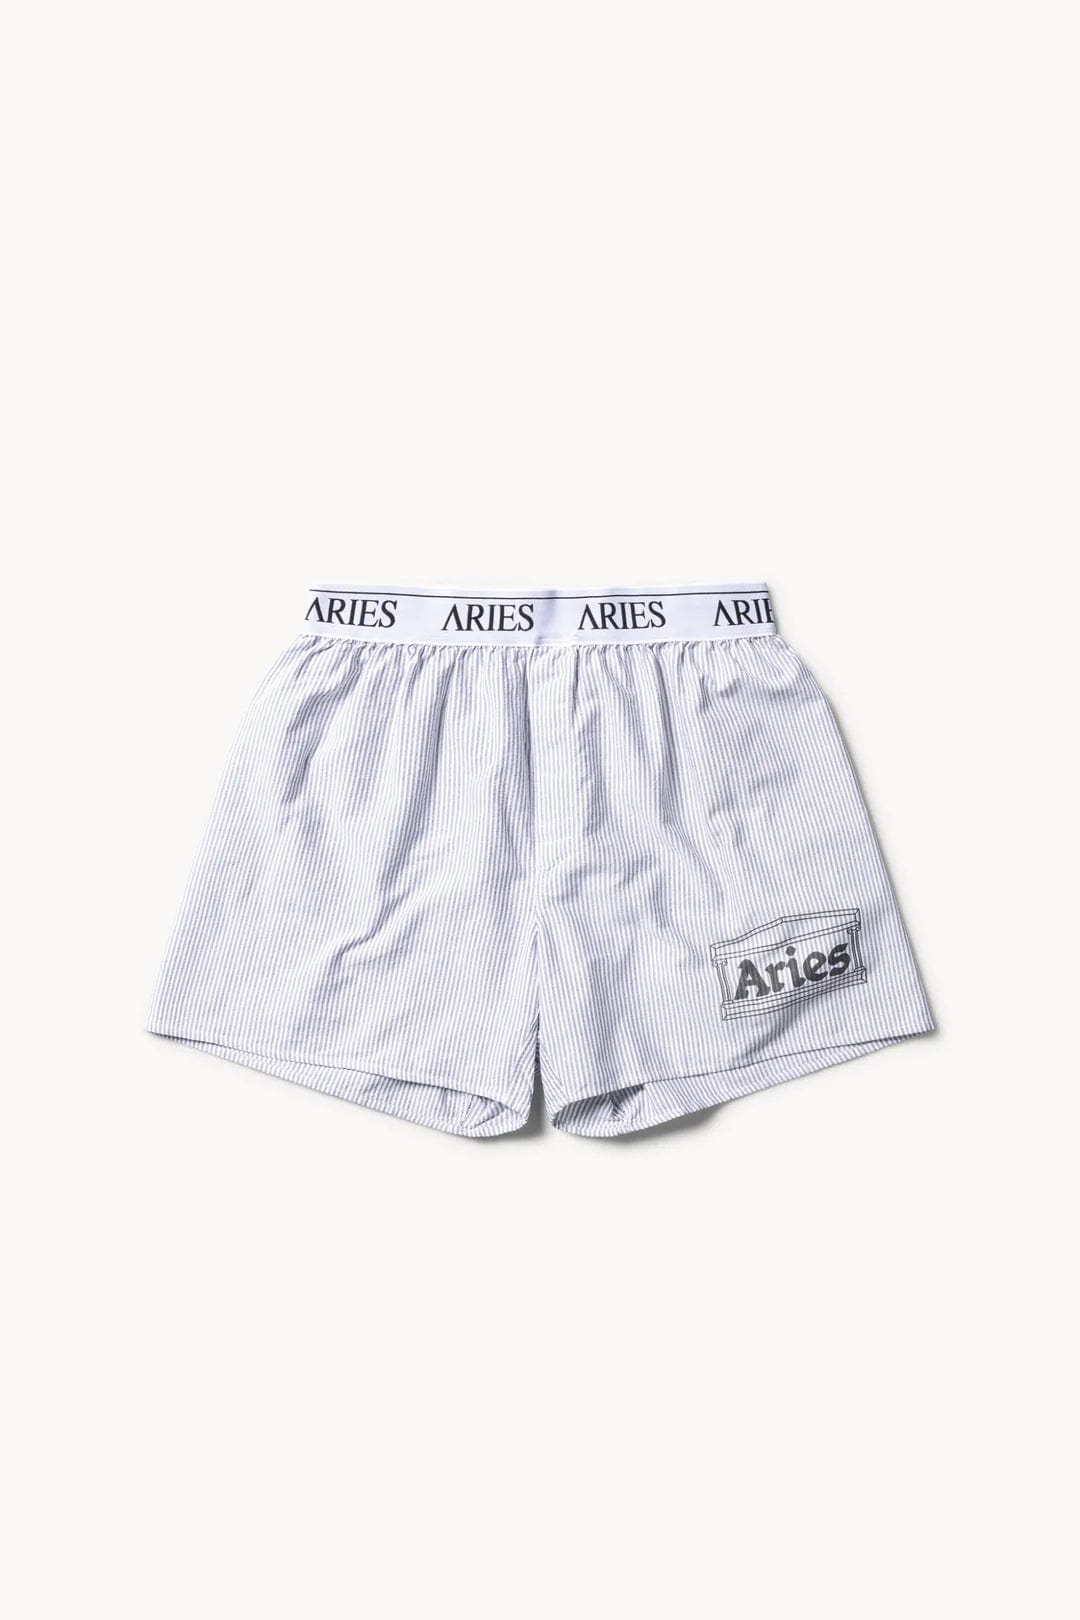 Aries Temple Boxer Shorts